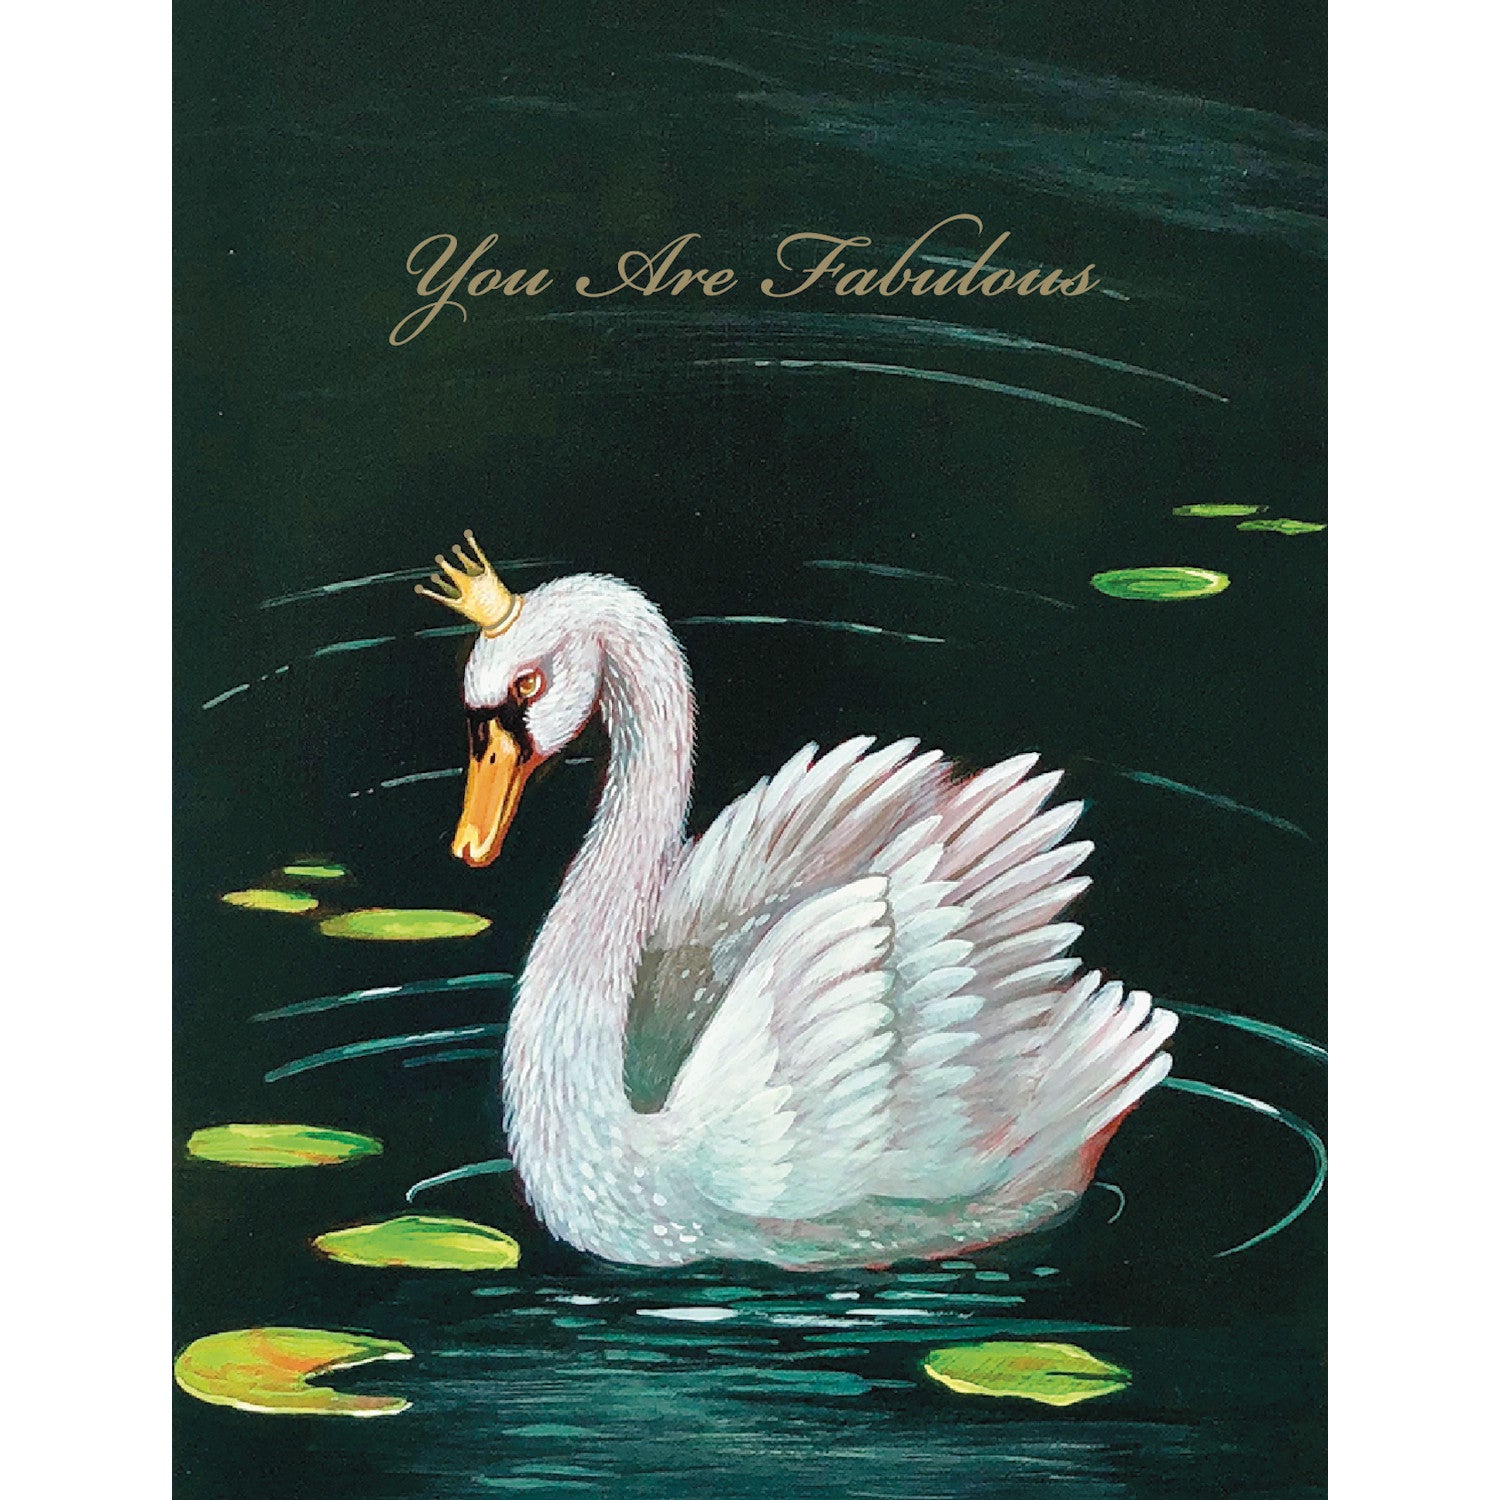 A white Fabulous Swan Card gracefully glides through a serene pond adorned with lily pads, surrounded by the heartfelt words &quot;you are fabulous.&quot; This exquisite scene, captured in an original artwork, is Hester &amp; Cook.